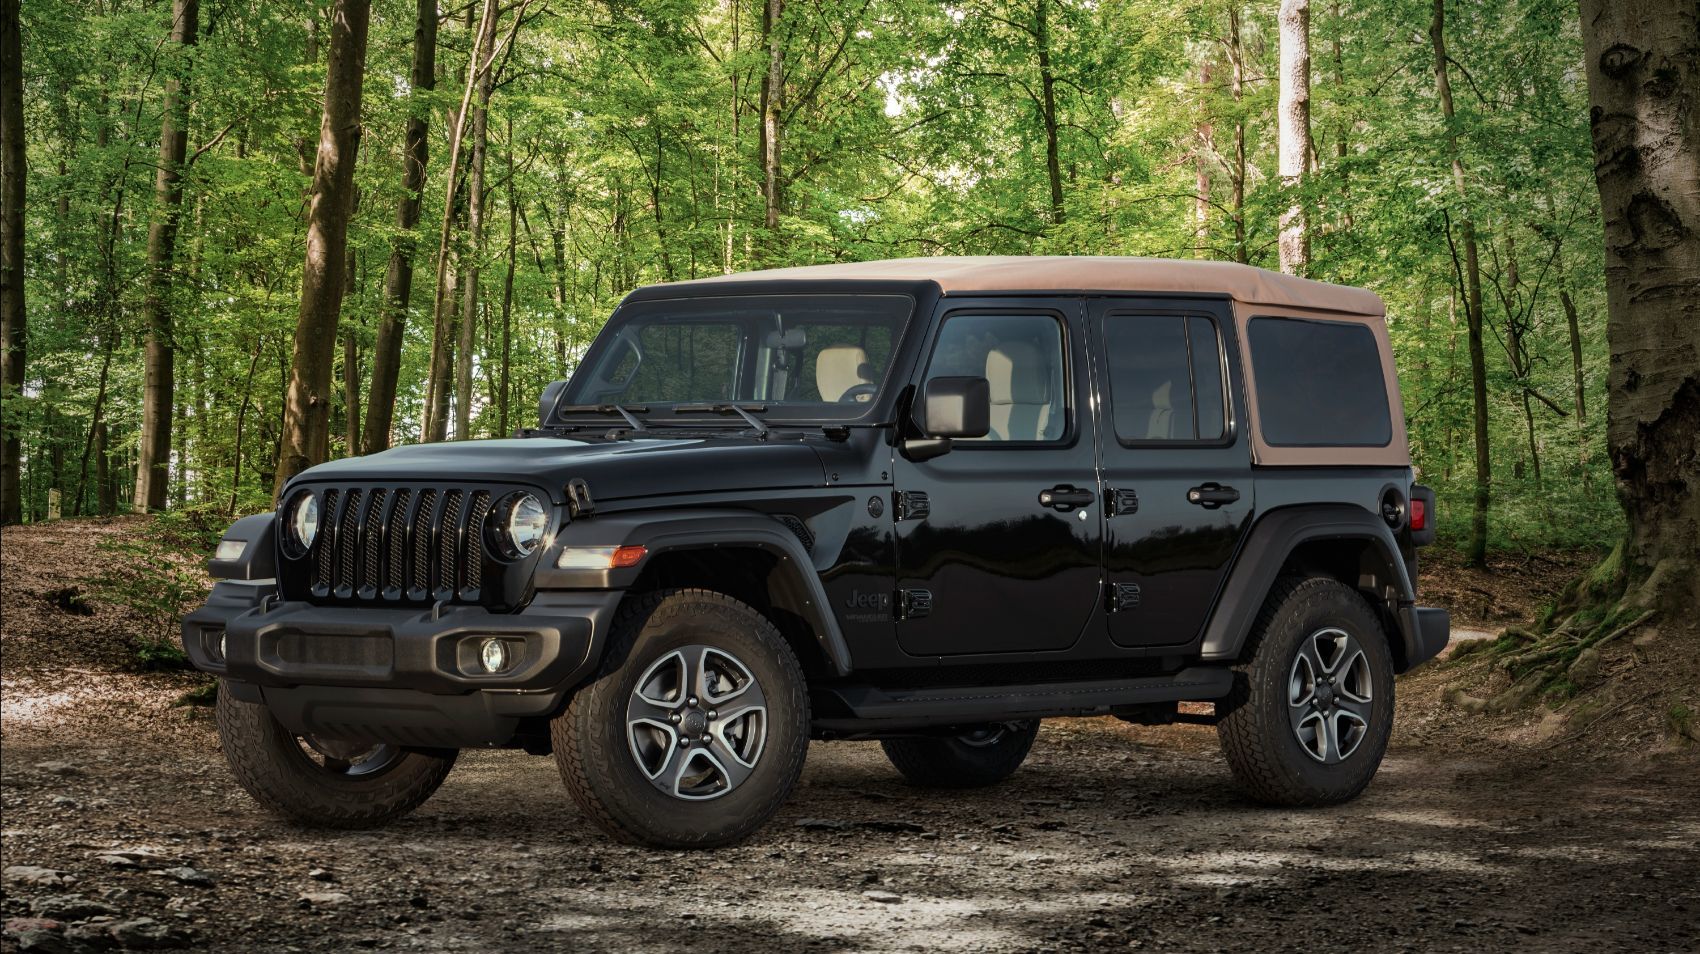 2020 Jeep Wrangler Willys; Black & Tan Editions Are Coming!